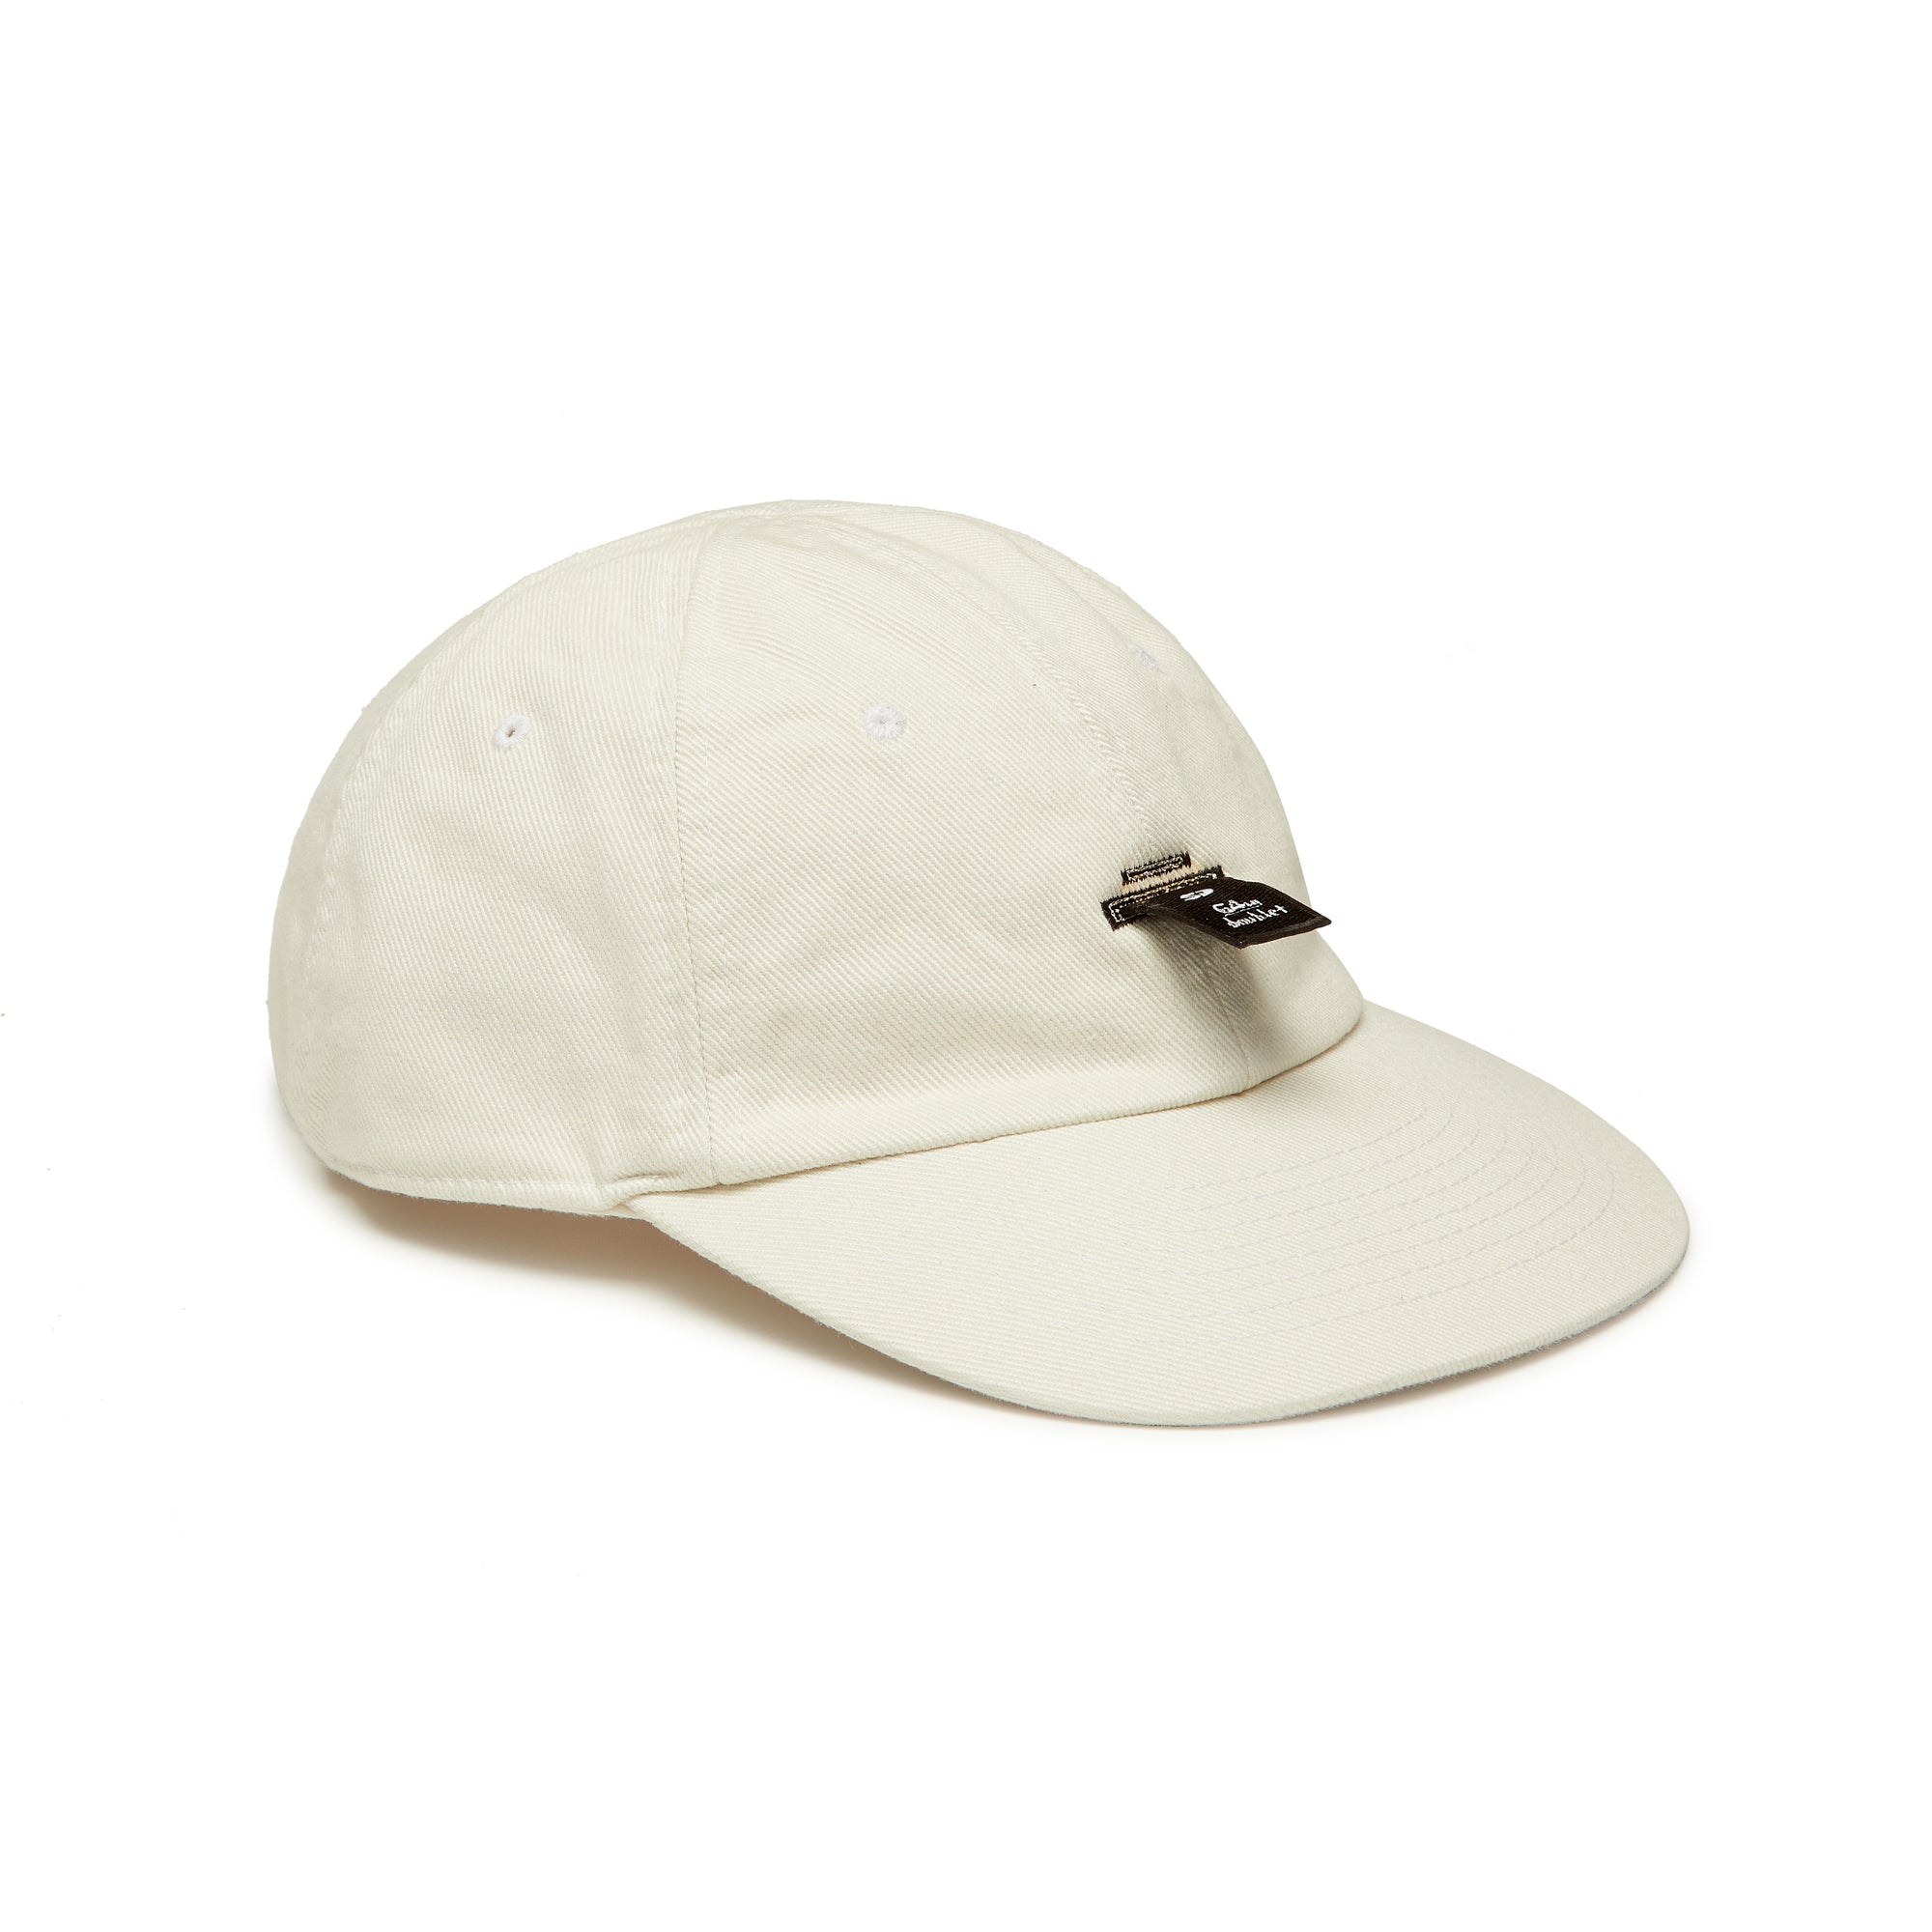 Doublet - Men's SD Card Embroidery Cap - (White) view 2